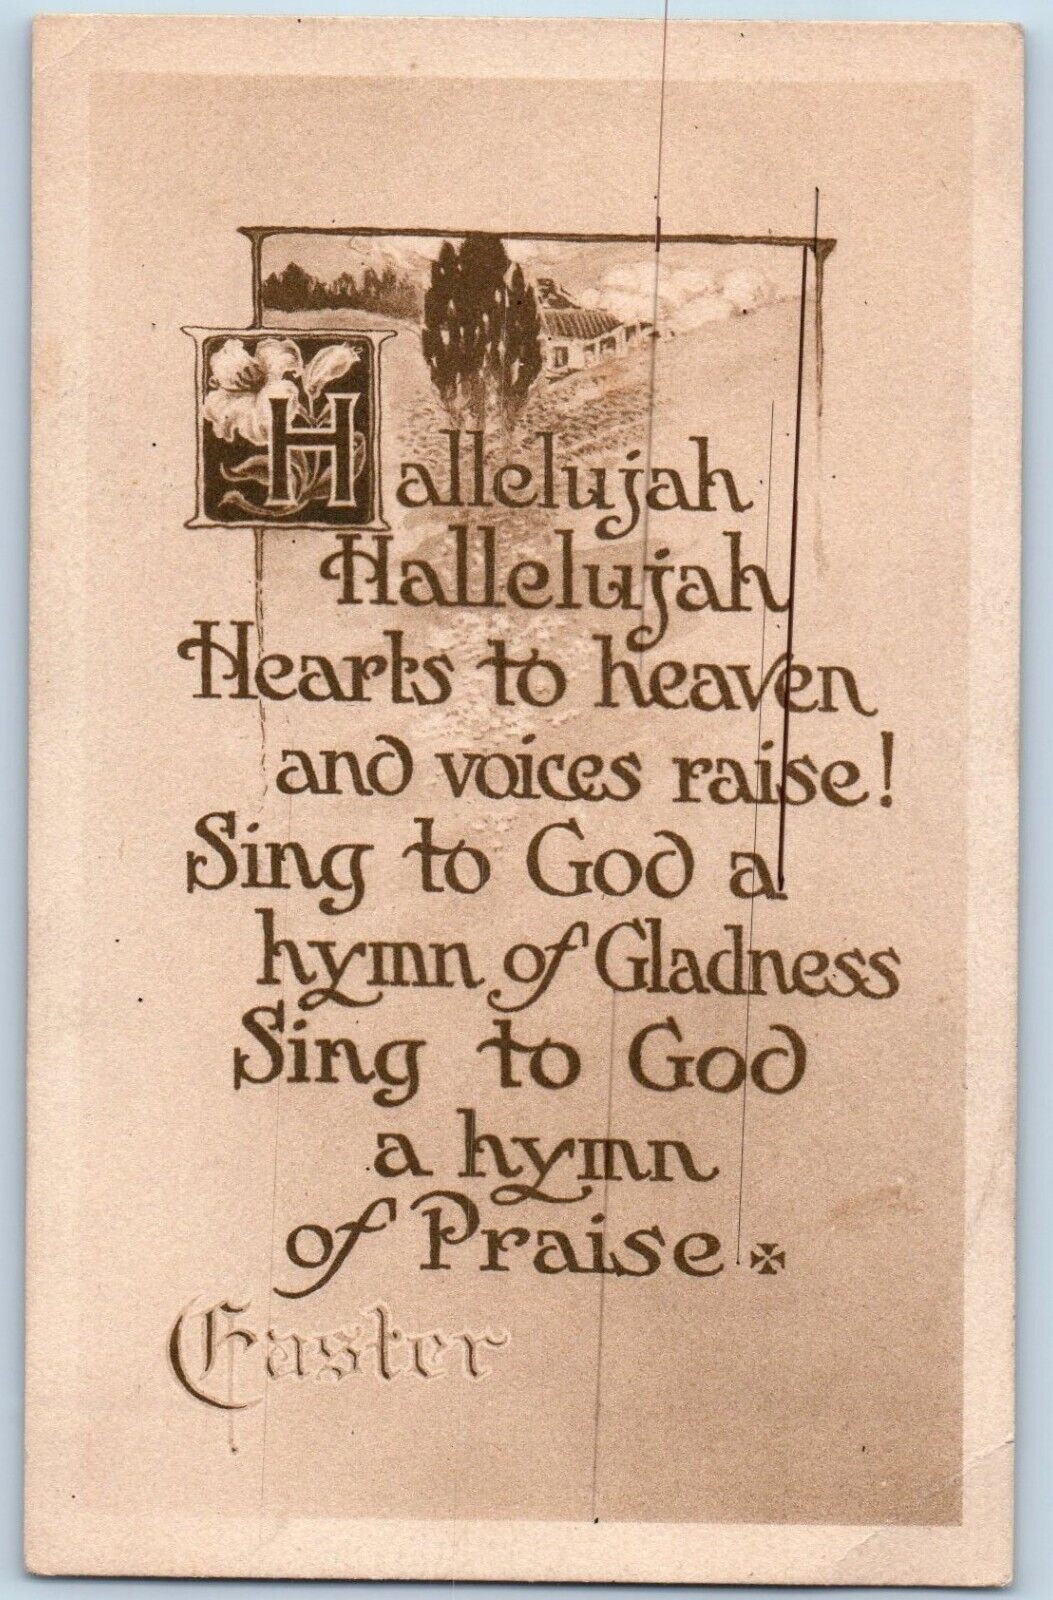 Easter Postcard Sing To God A Hymn Of Praise c1910's Posted Antique